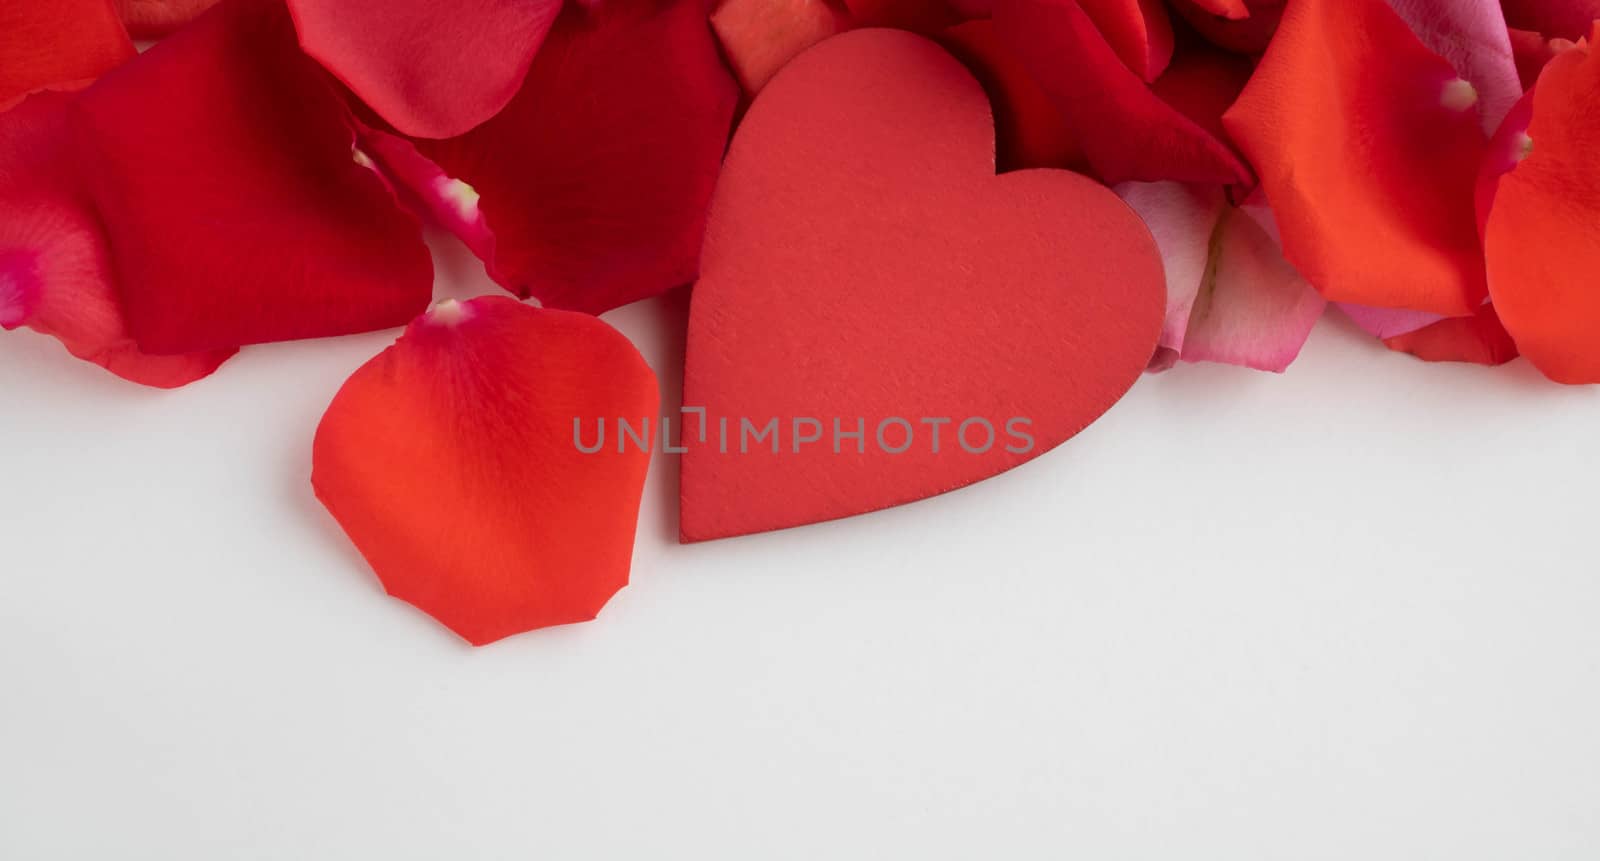 On the red rose petals is a red wooden heart.Concept of mother's Day, family Day, Valentine's Day, March 8 by lapushka62